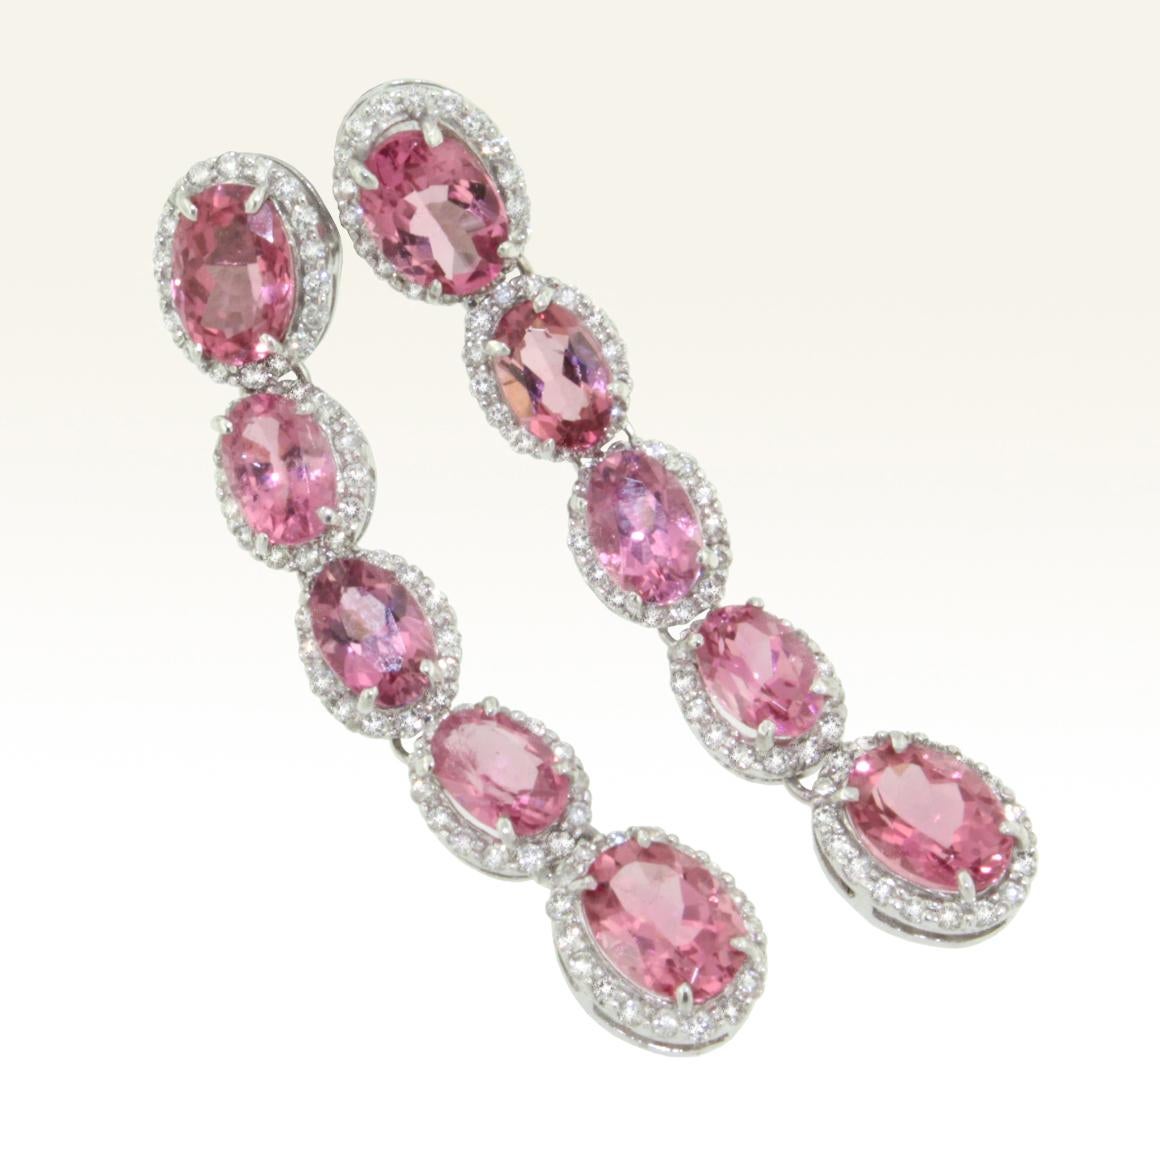 Earrings in 18k white gold with pink Tourmaline (oval cut, size: 4x6 mm and 5x7 mm cts 6,90) and white Diamonds ct 0.80 VS colour G/H.   
Even the simplest of outfits can be transformed with the right accessories! With amazing earrings made in Italy